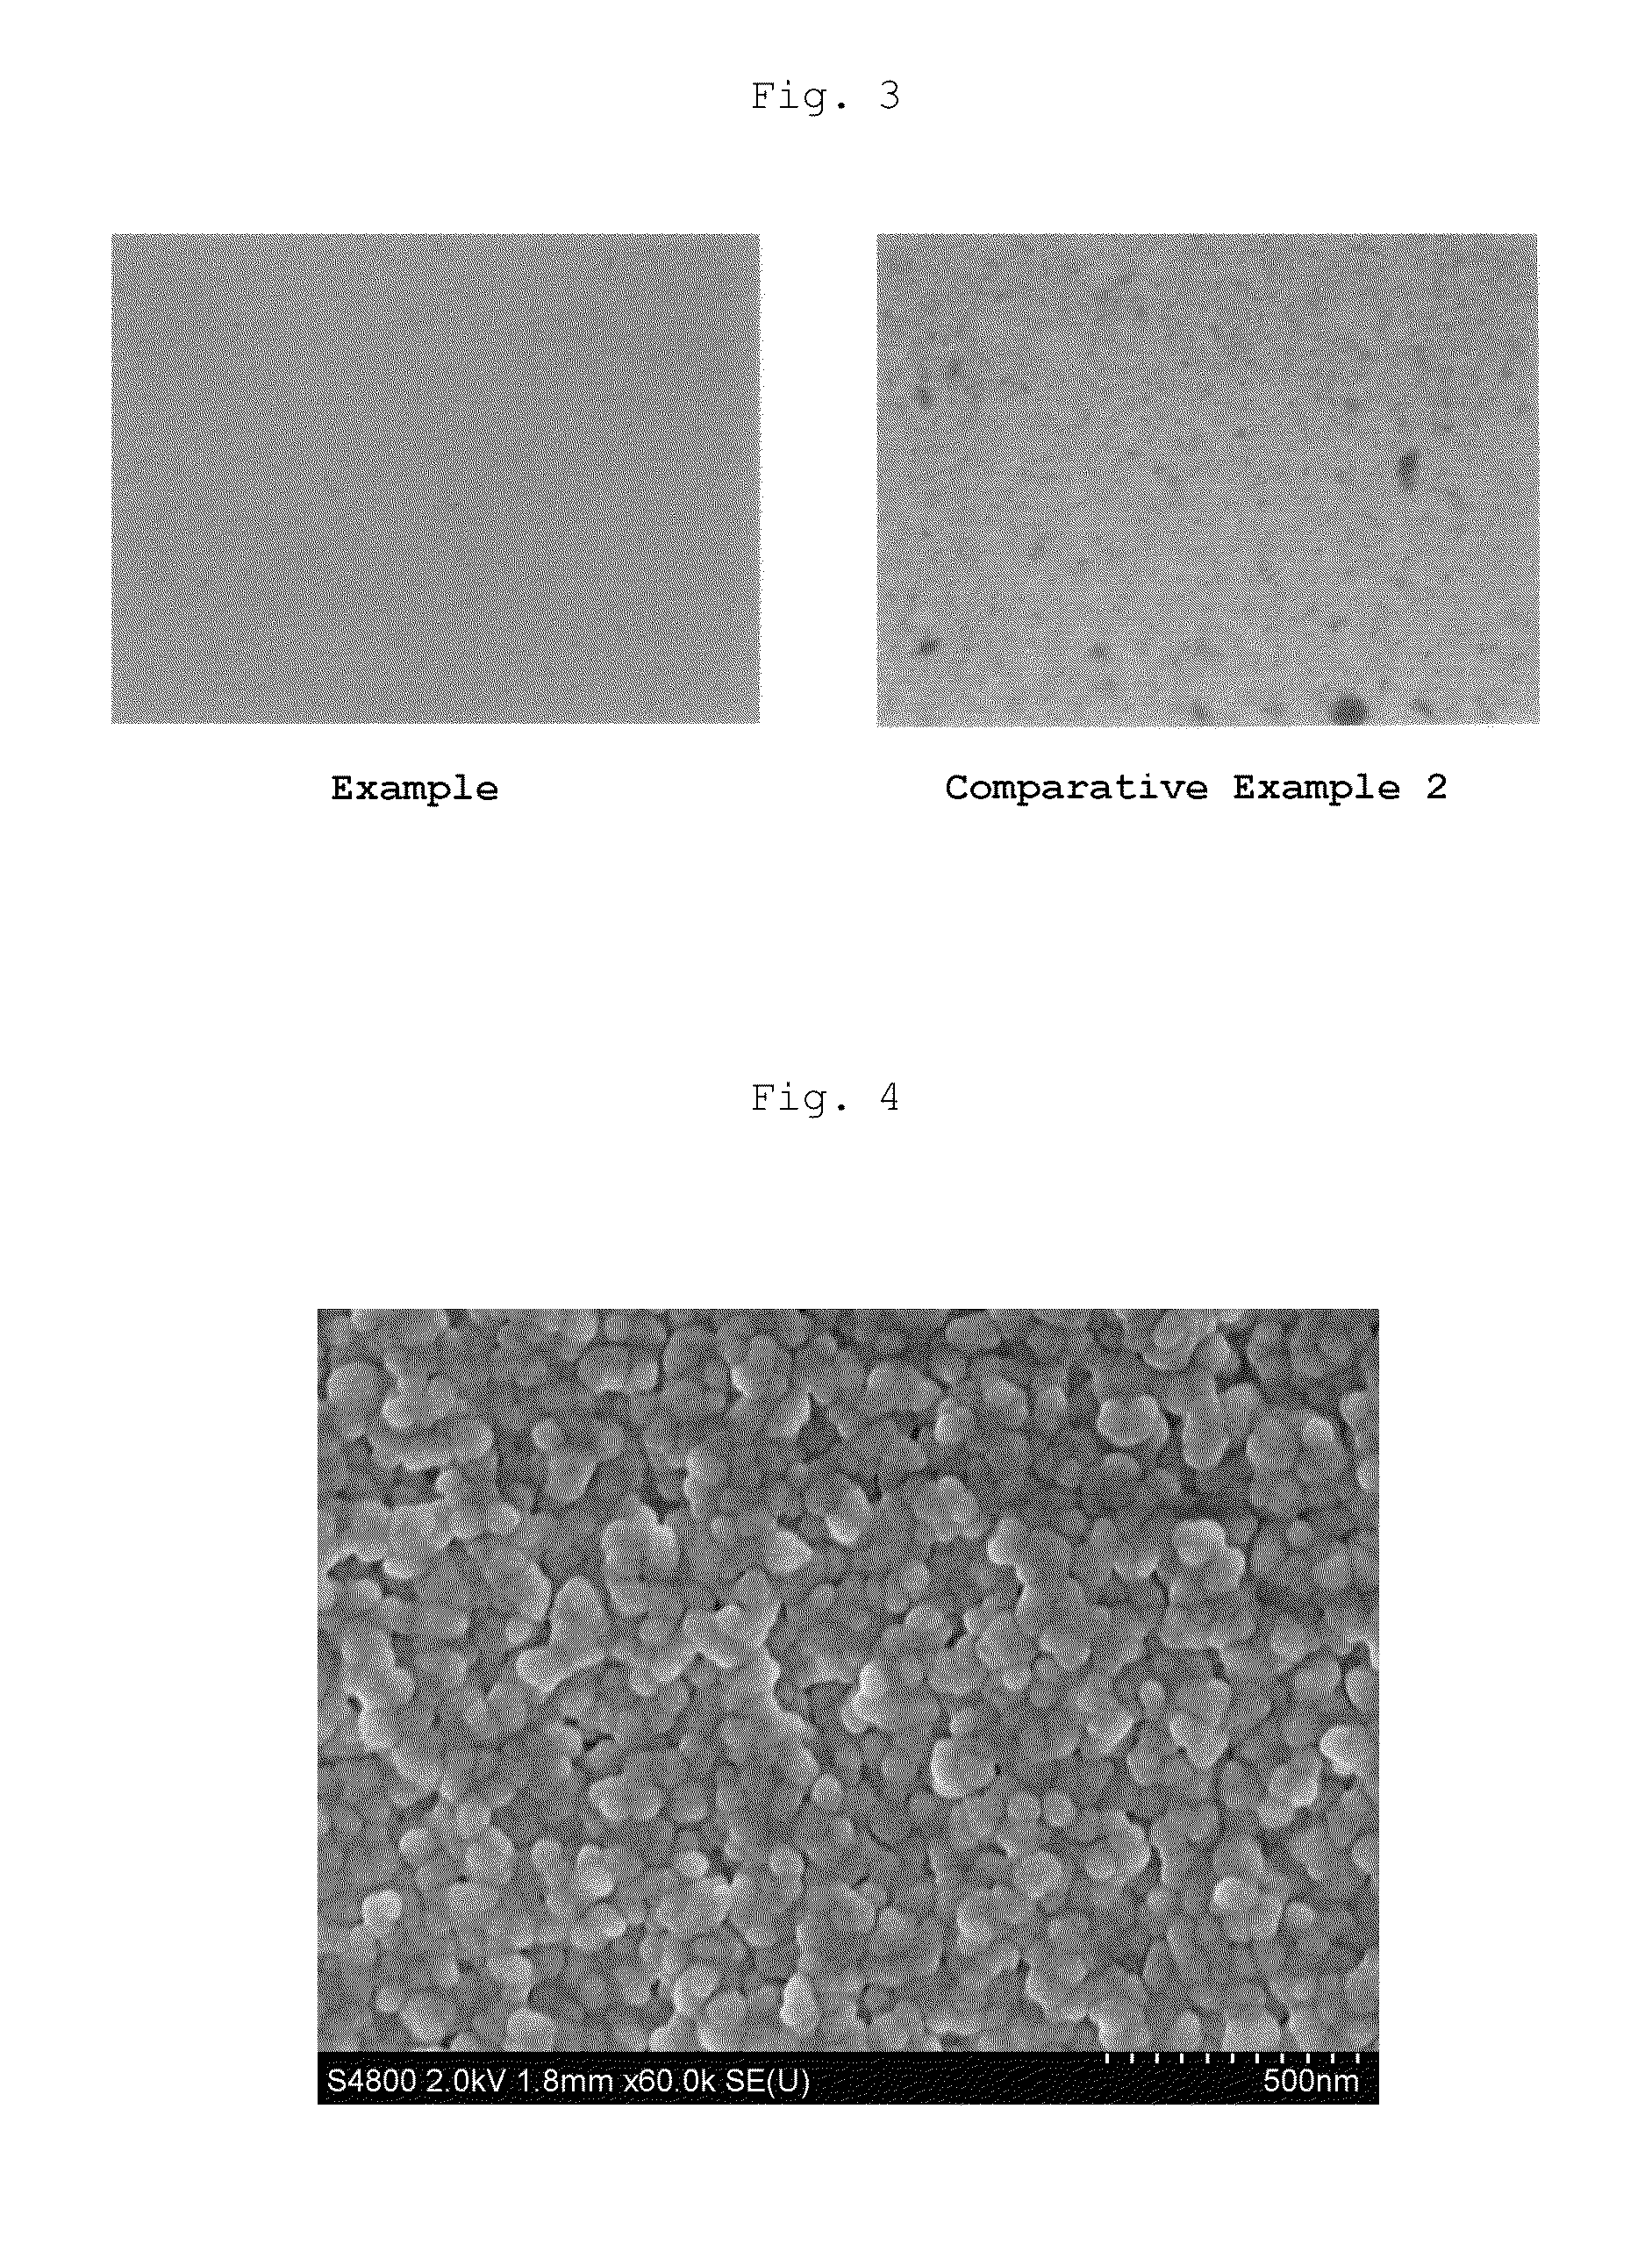 Process for producing block polymer, coated pigment and aqueous pigment dispersion